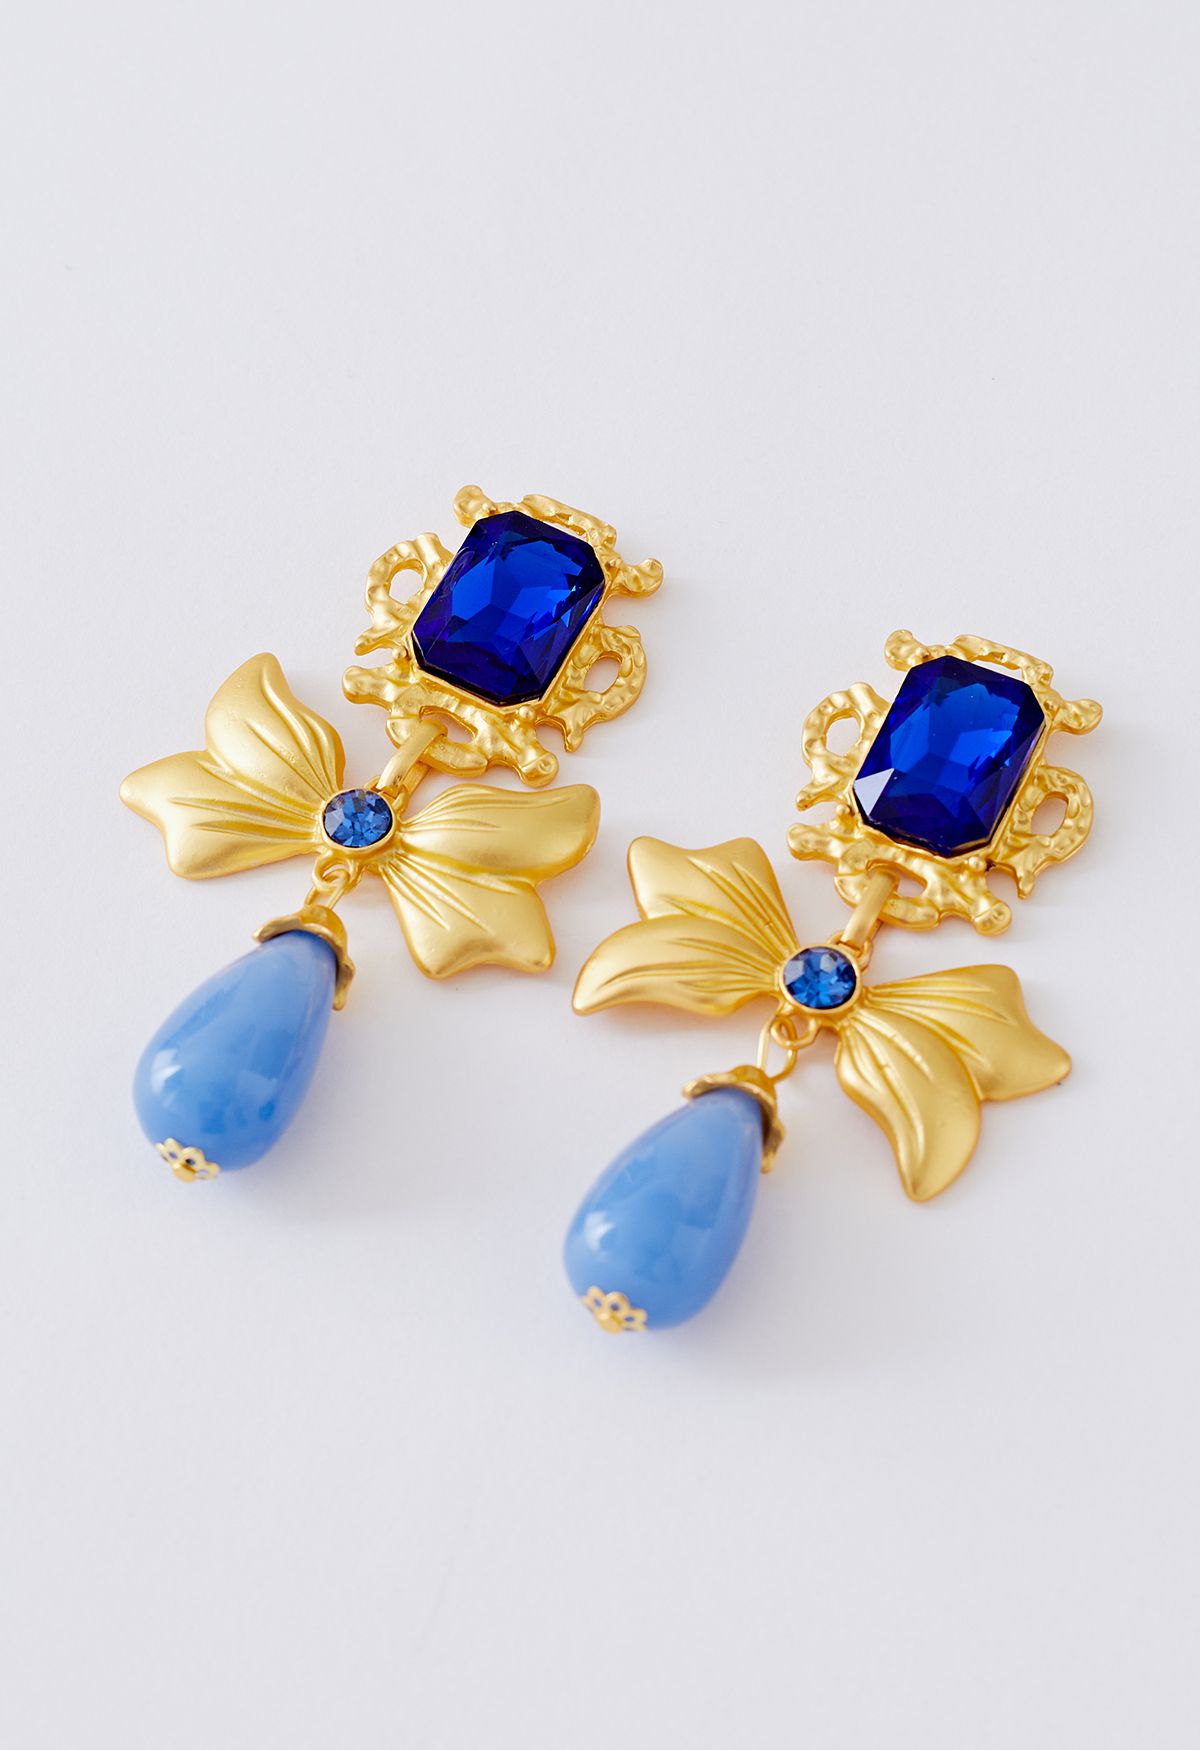 Golden Bowknot Colored Glaze Earrings - Retro, Indie and Unique Fashion